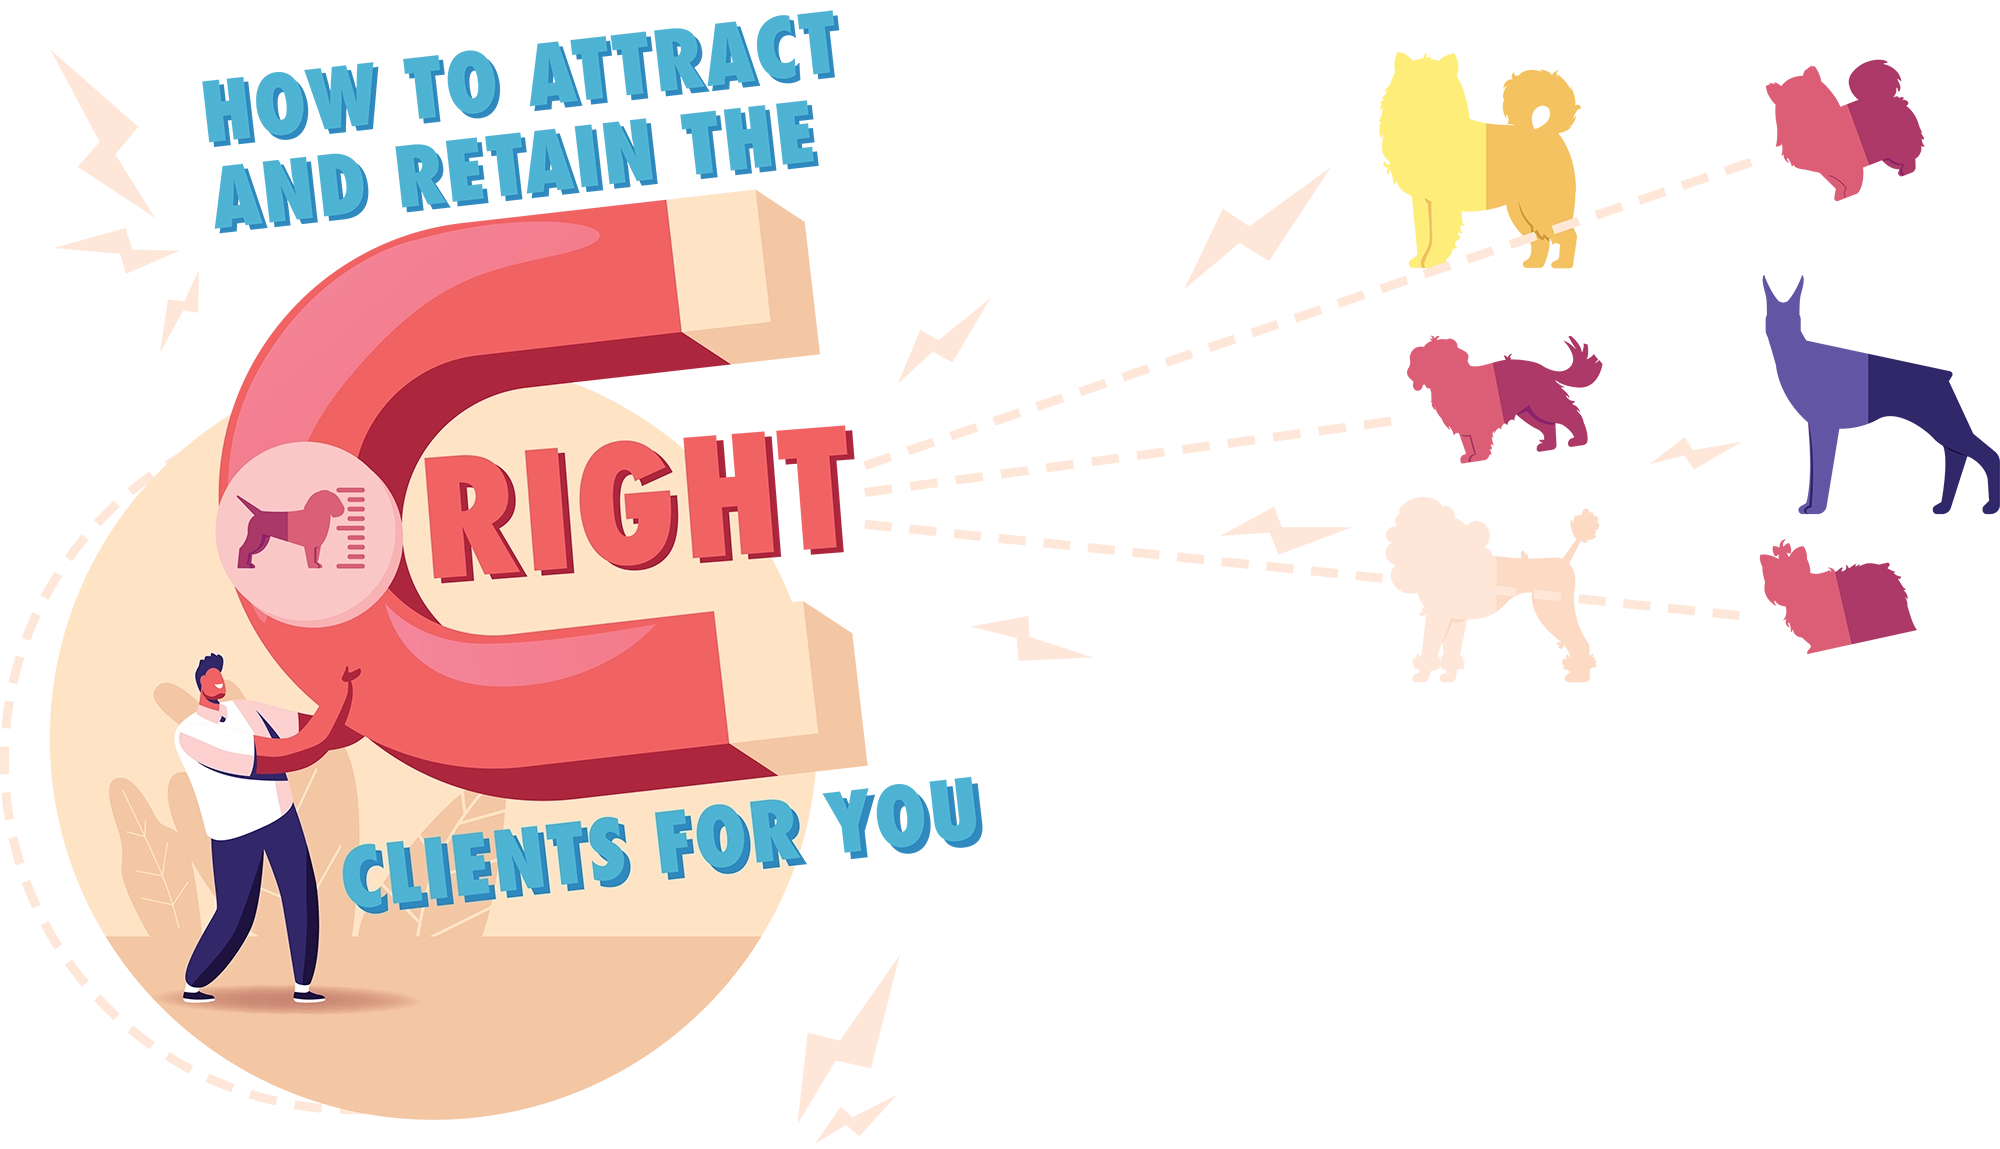 How to attract and retain the right clients for you